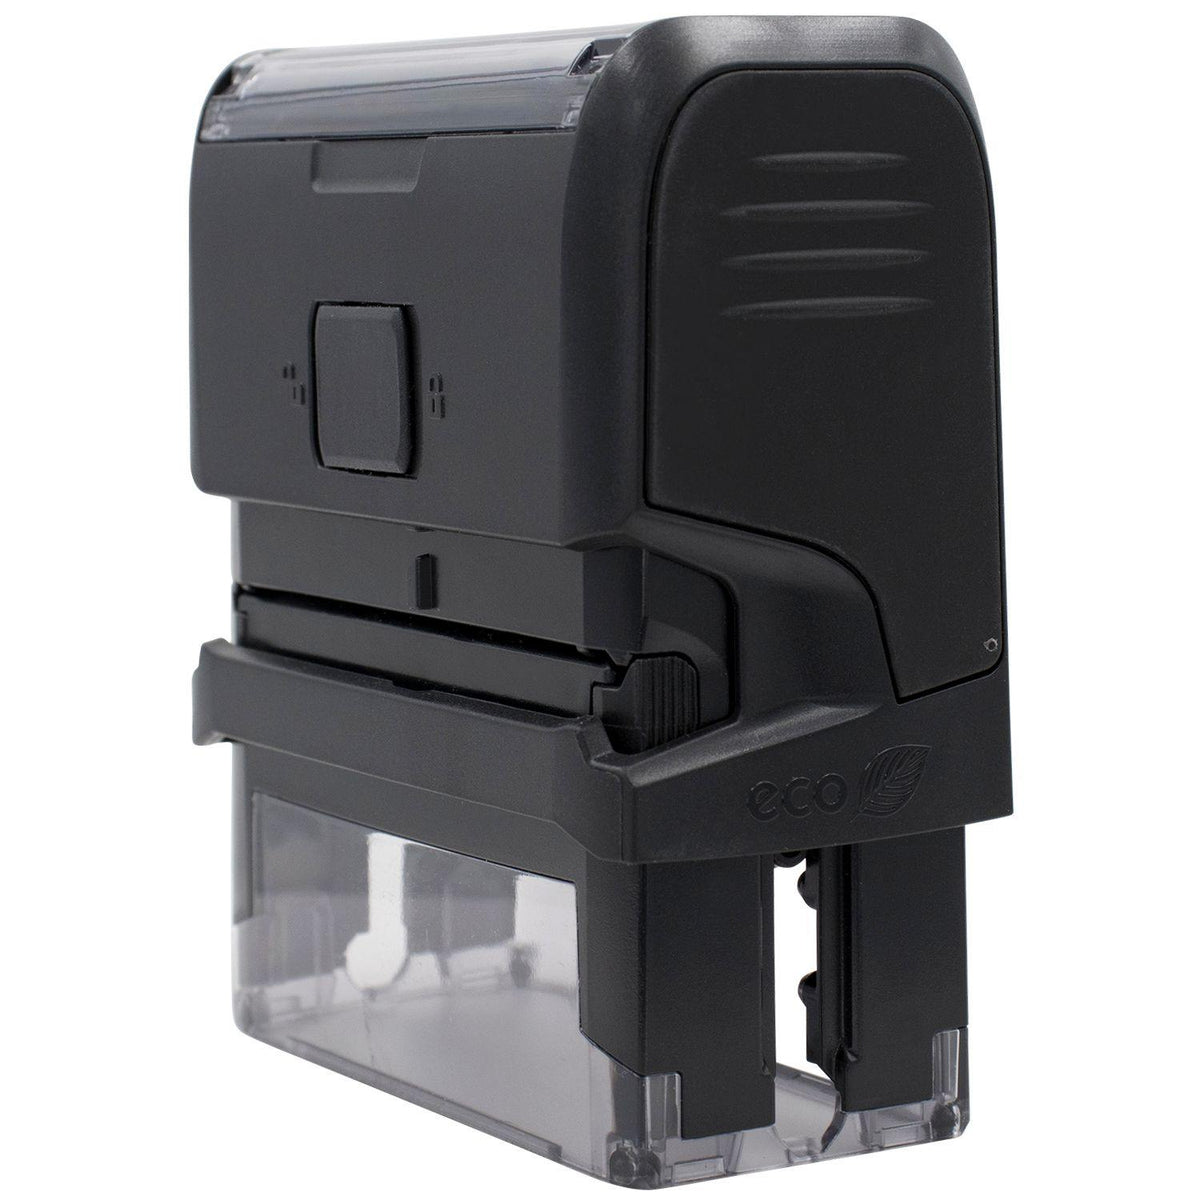 Large Self Inking Copy For Your Information Stamp - Engineer Seal Stamps - Brand_Trodat, Impression Size_Large, Stamp Type_Self-Inking Stamp, Type of Use_Professional